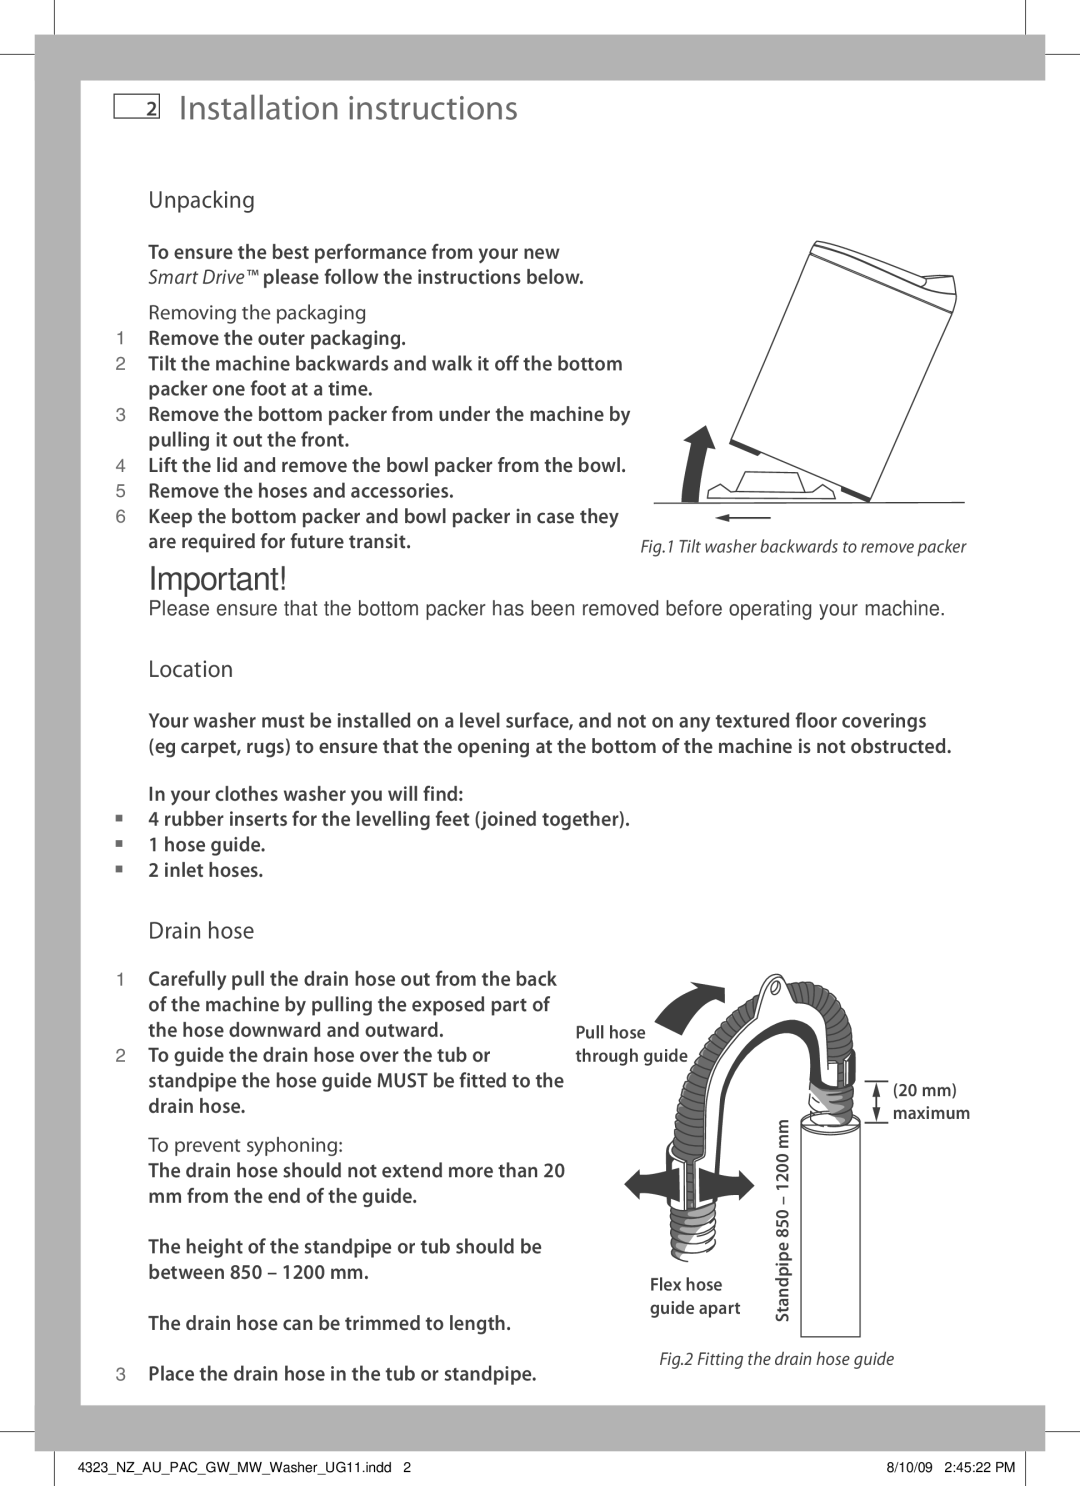 Fisher & Paykel 4323 installation instructions Installation instructions, Unpacking, Location, Drain hose 